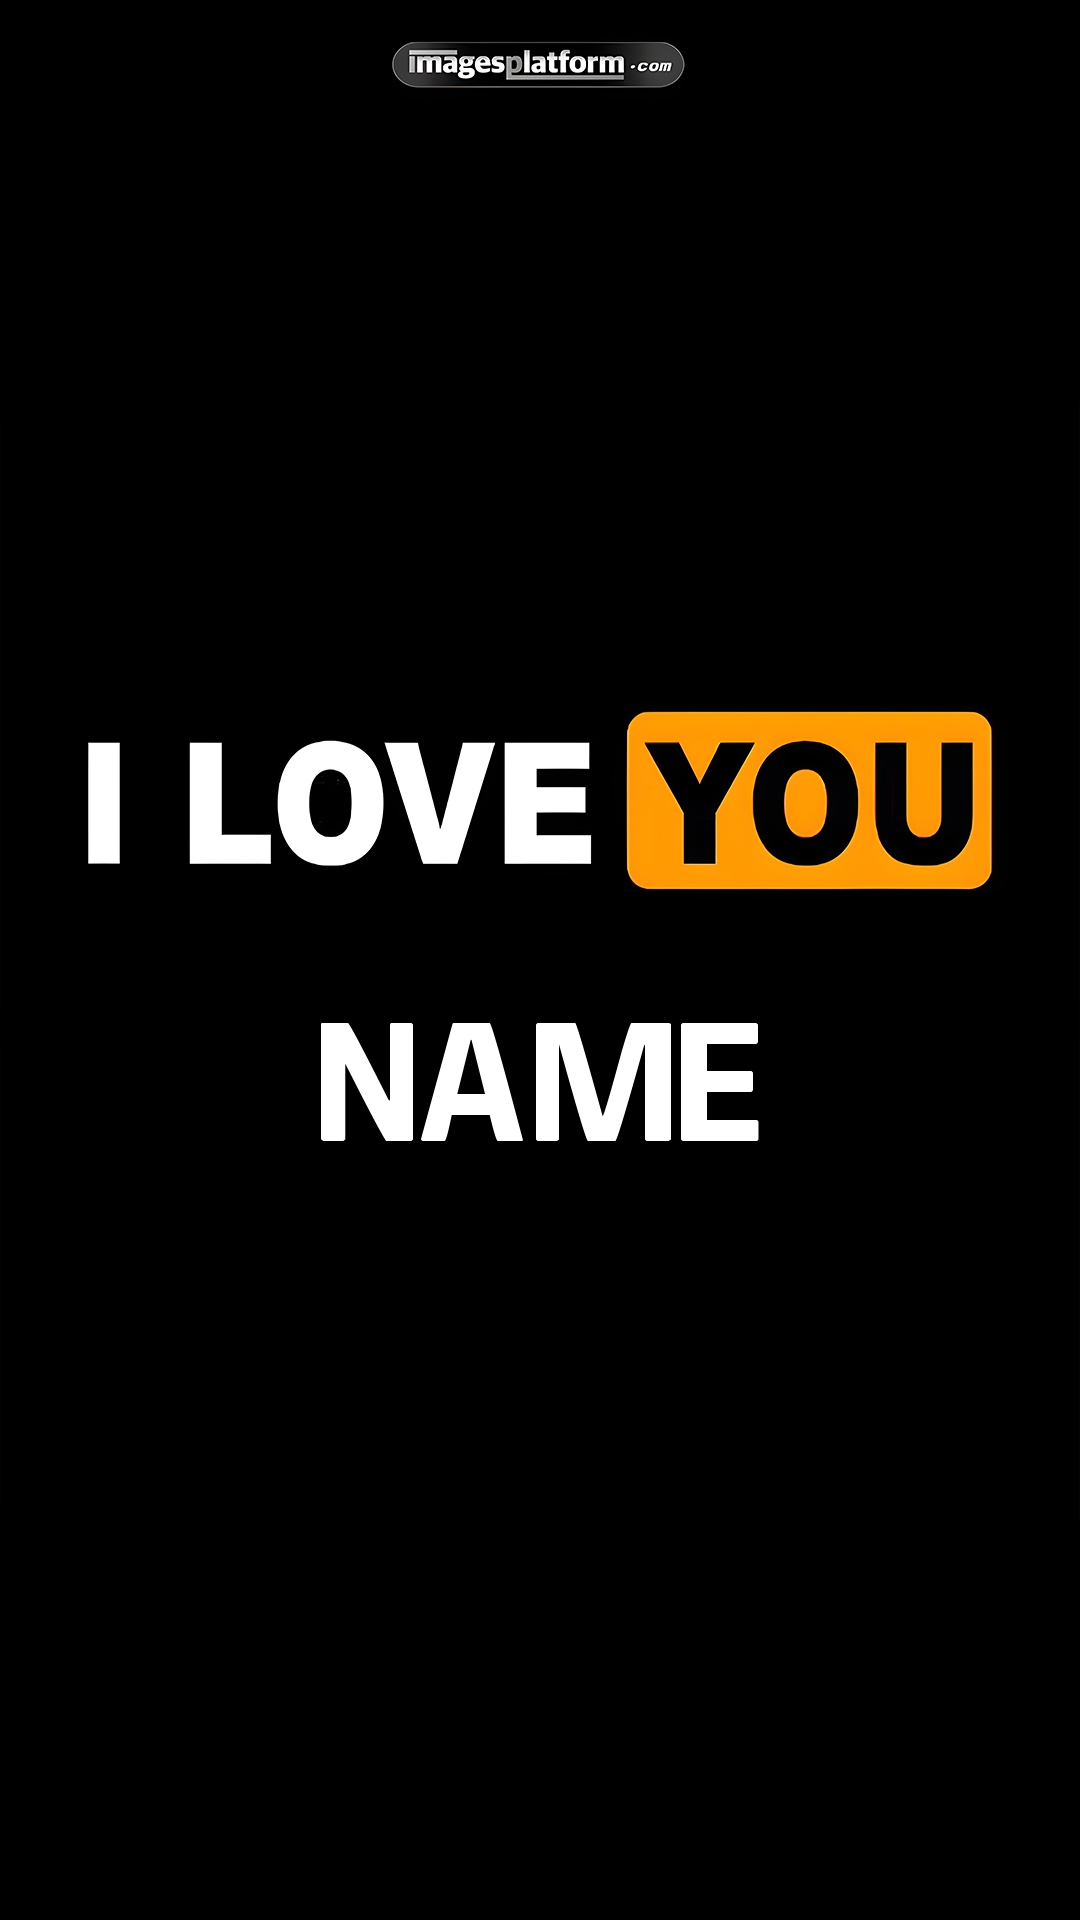 Awesome Way To Say I Love You